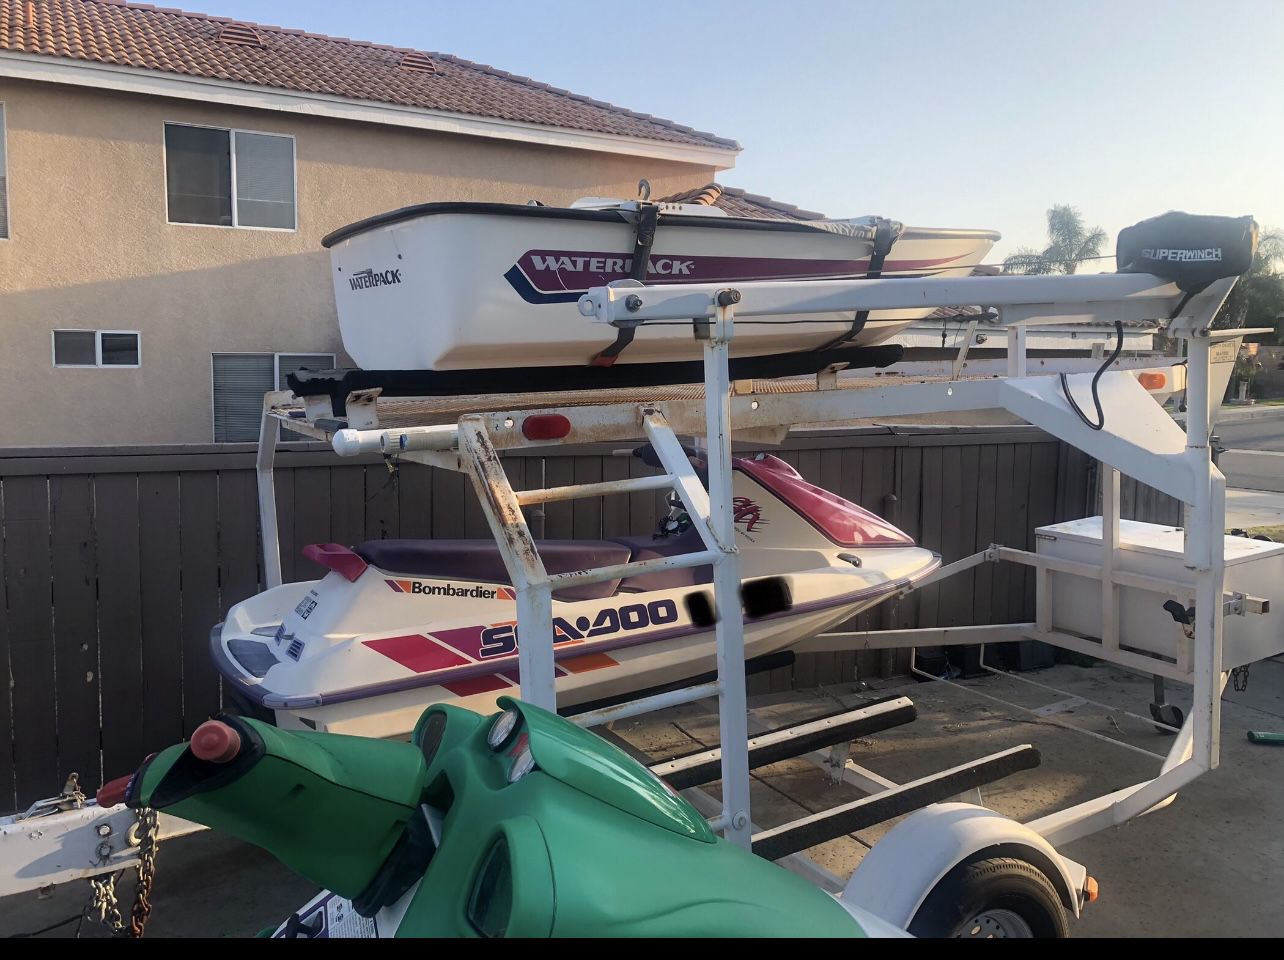 1993 Double trailer and two Sea-doo jet skis and a water pack boat